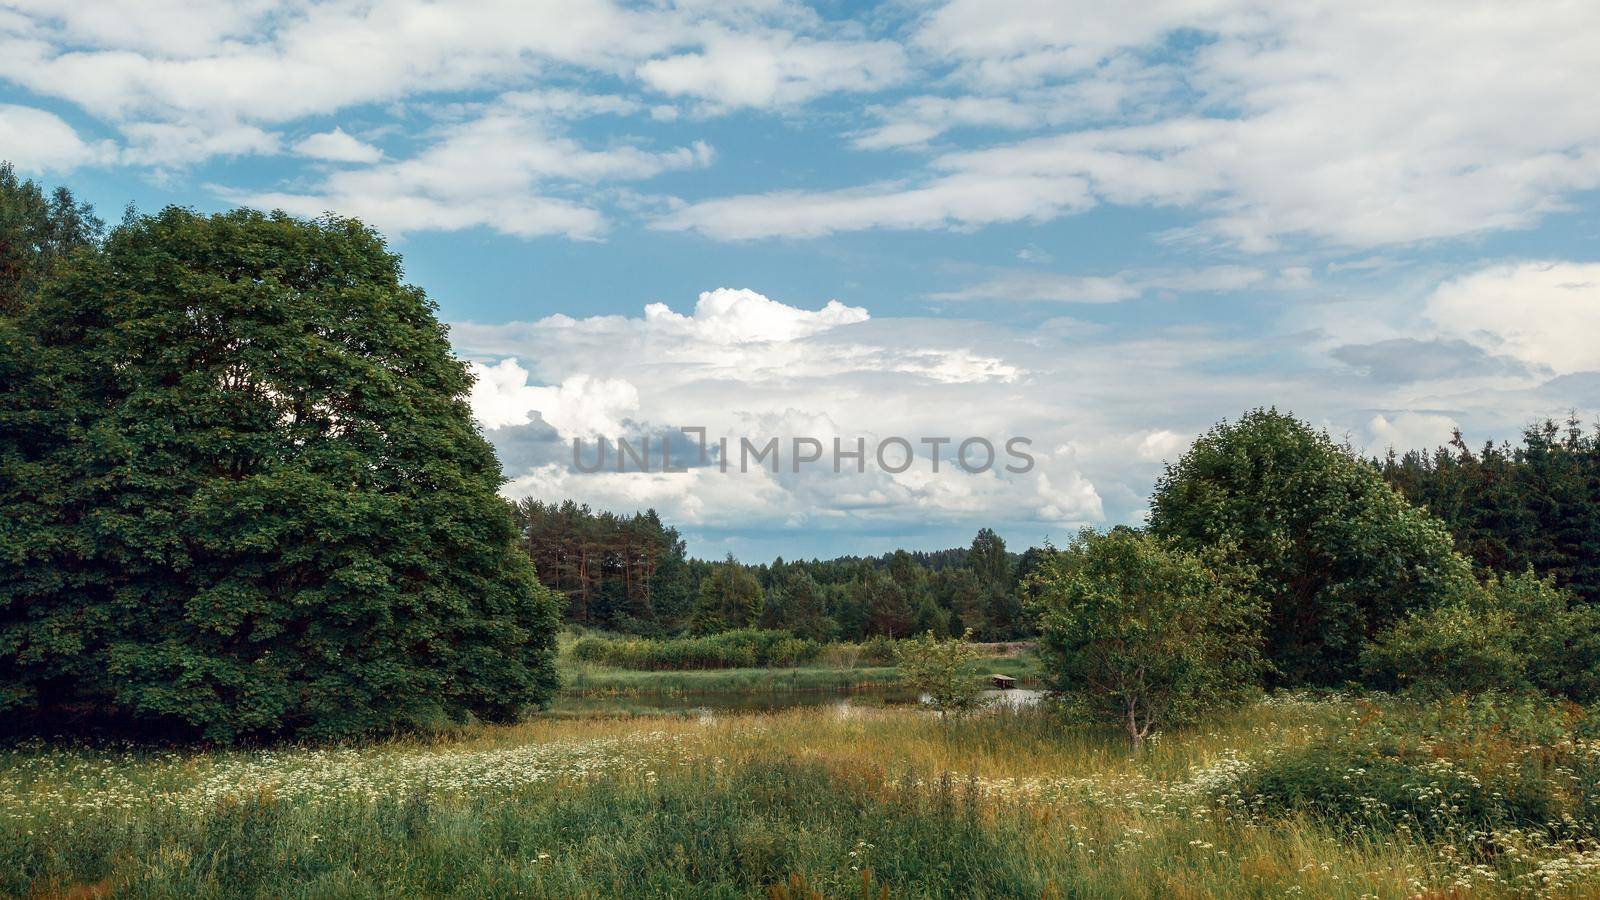 Wonderful landscape of a summer sunny day, Lithuanian rural fields by the lake, blue sky with white clouds.